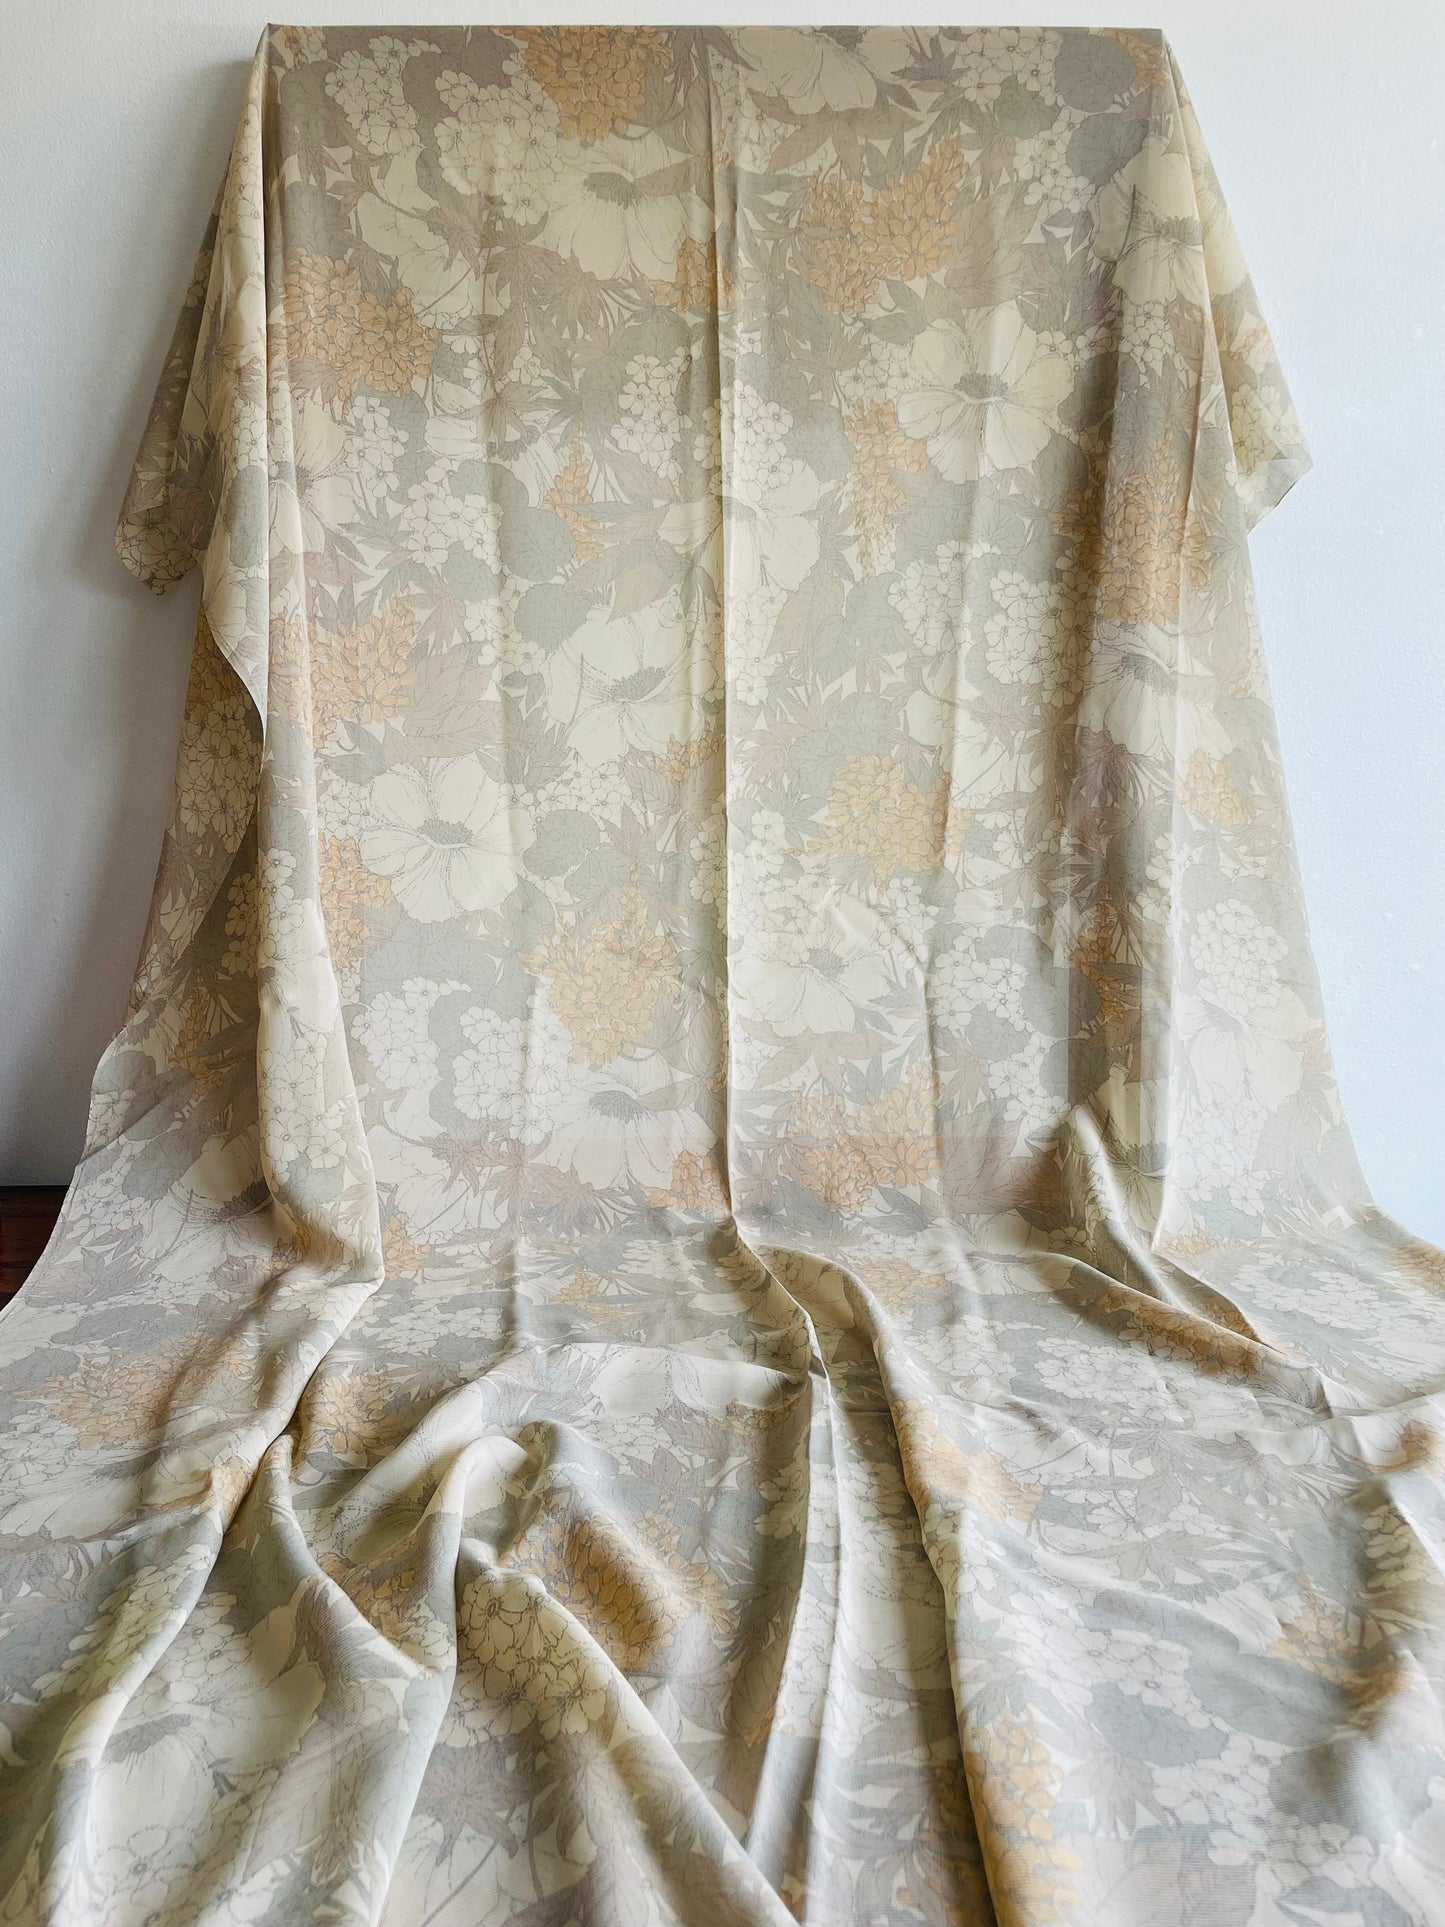 Gauzy Sheer Fabric with Floral Design